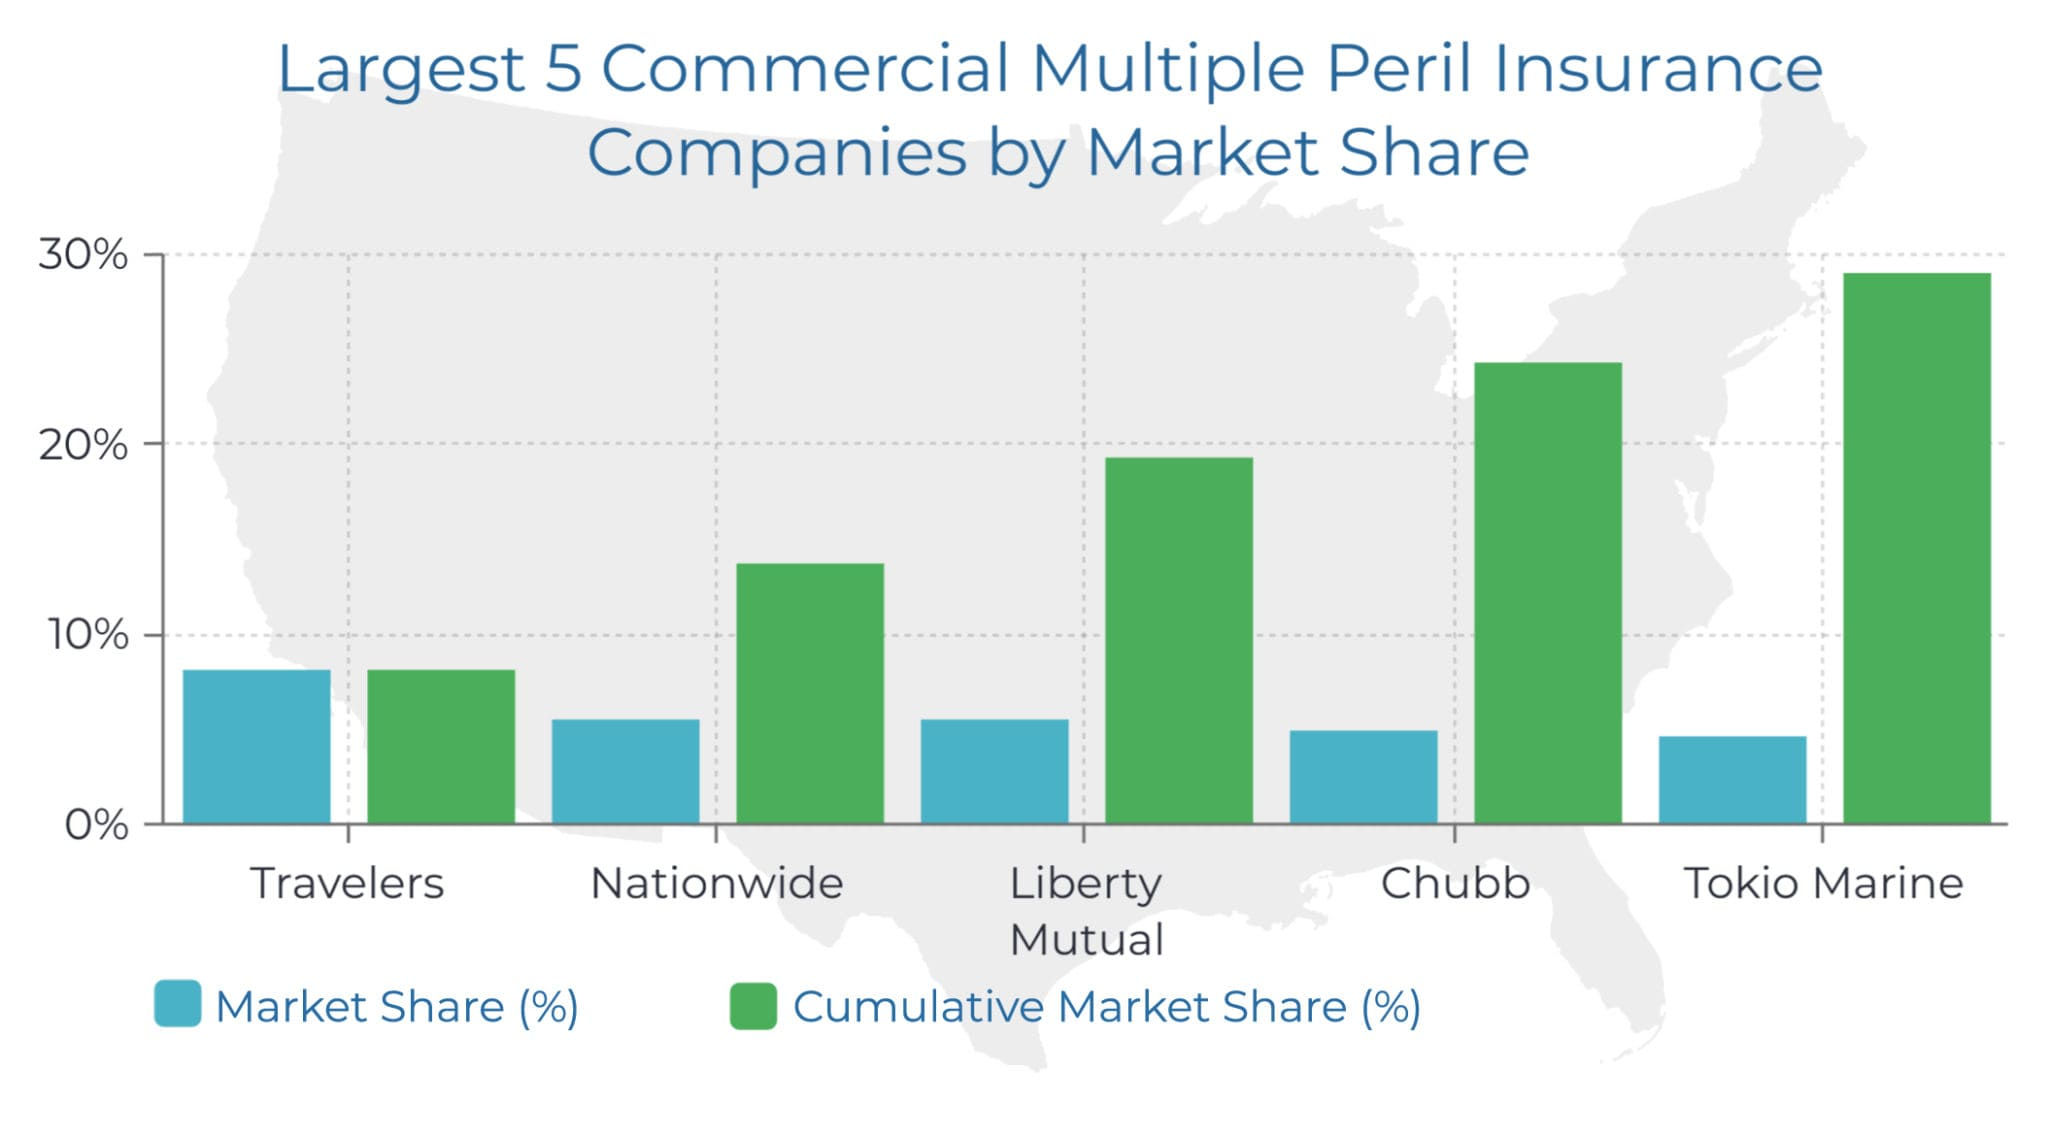 5 largest insurance companies in the multiple peril insurance market by market share